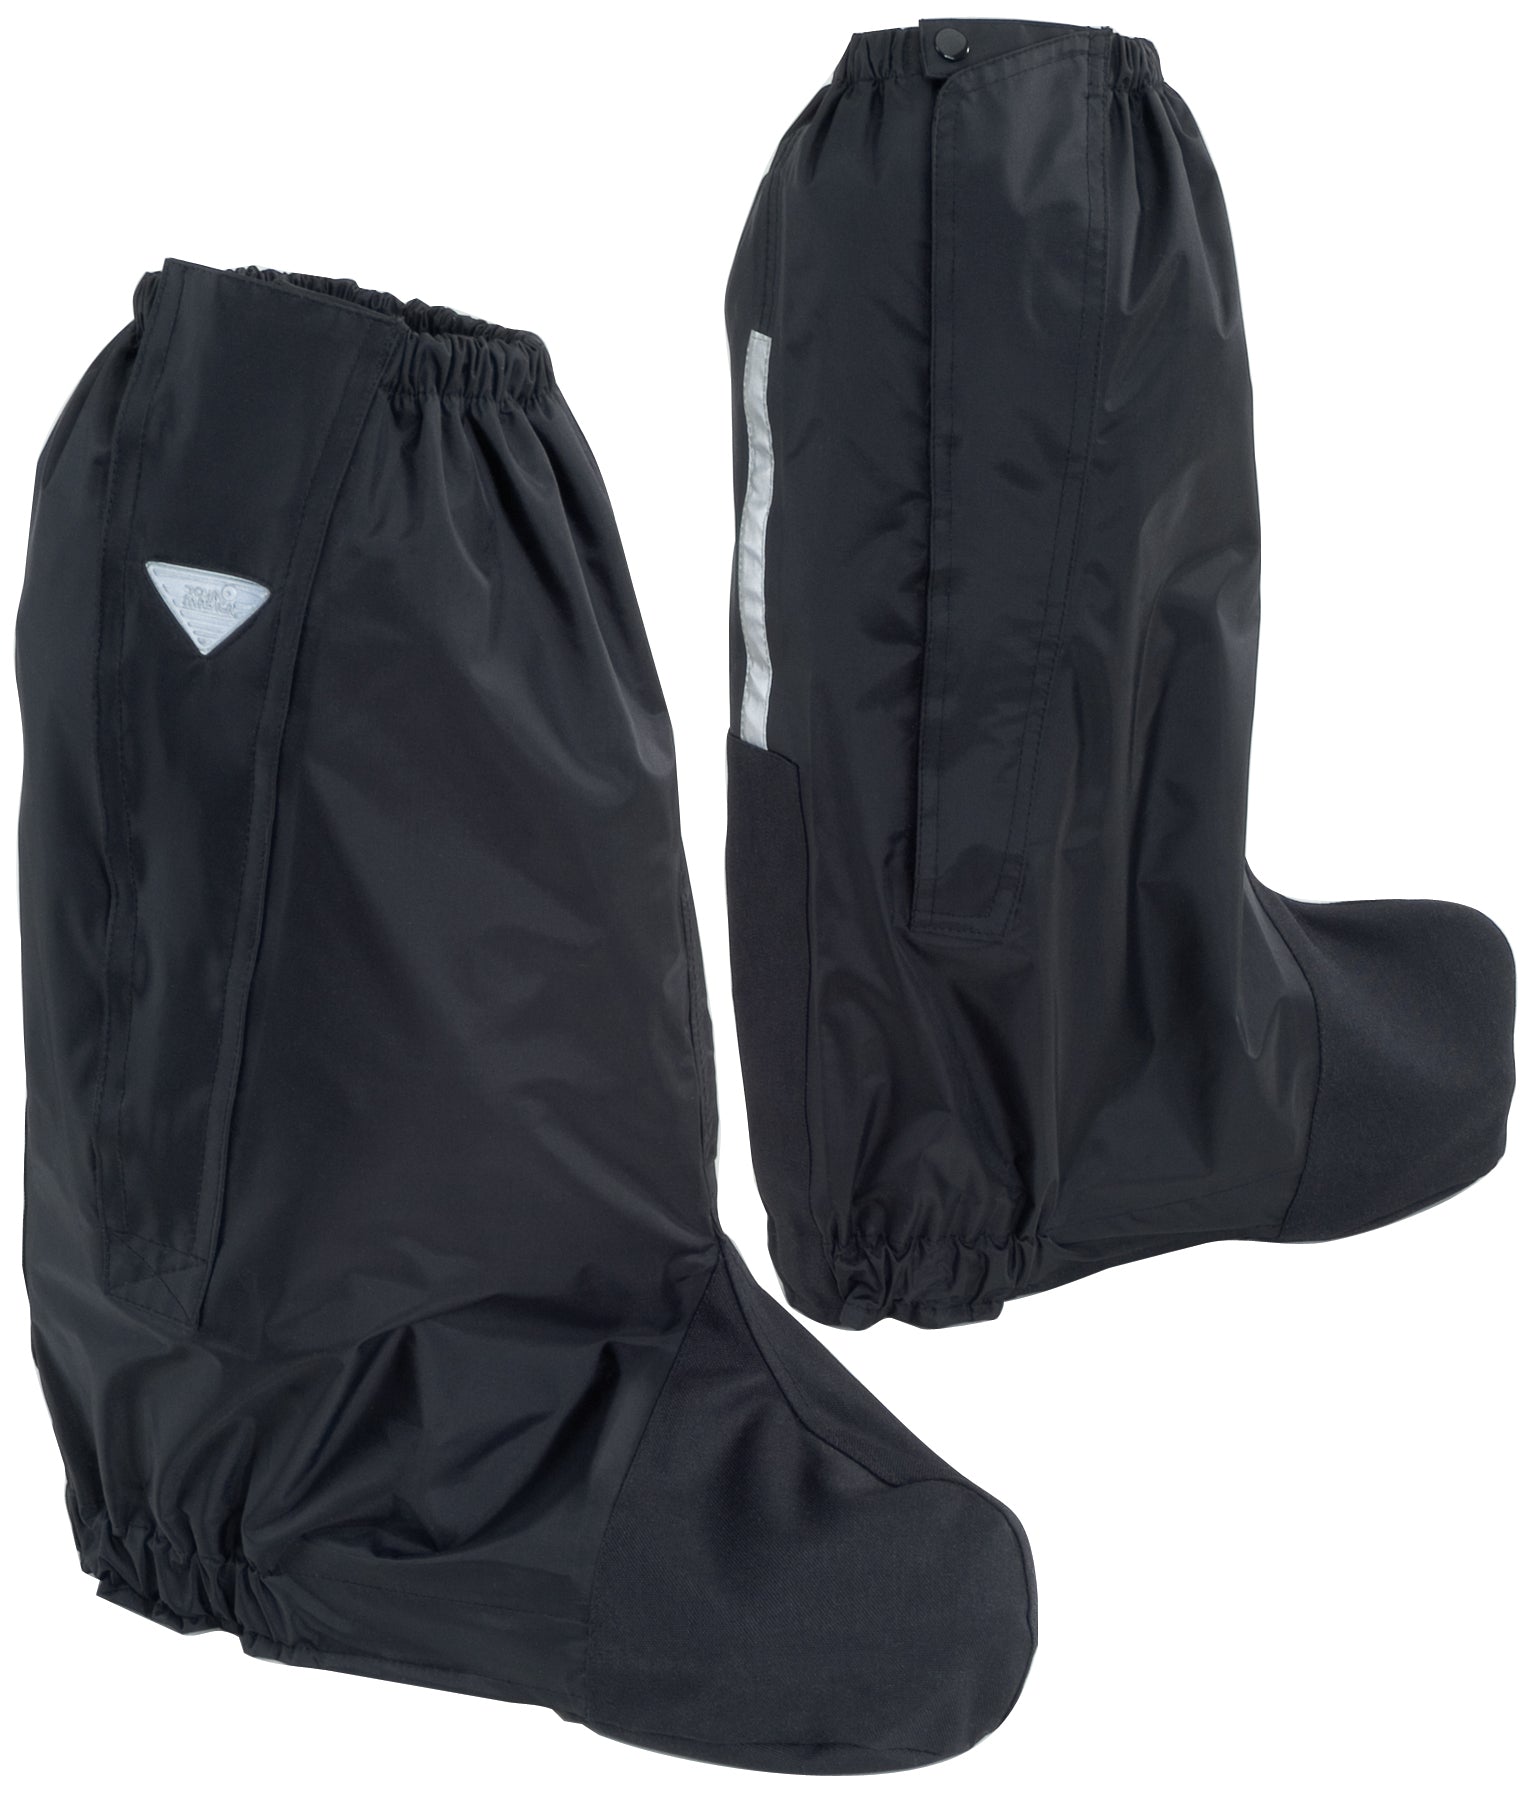 DELUXE BOOT RAIN COVERS XLG8769-0105-07